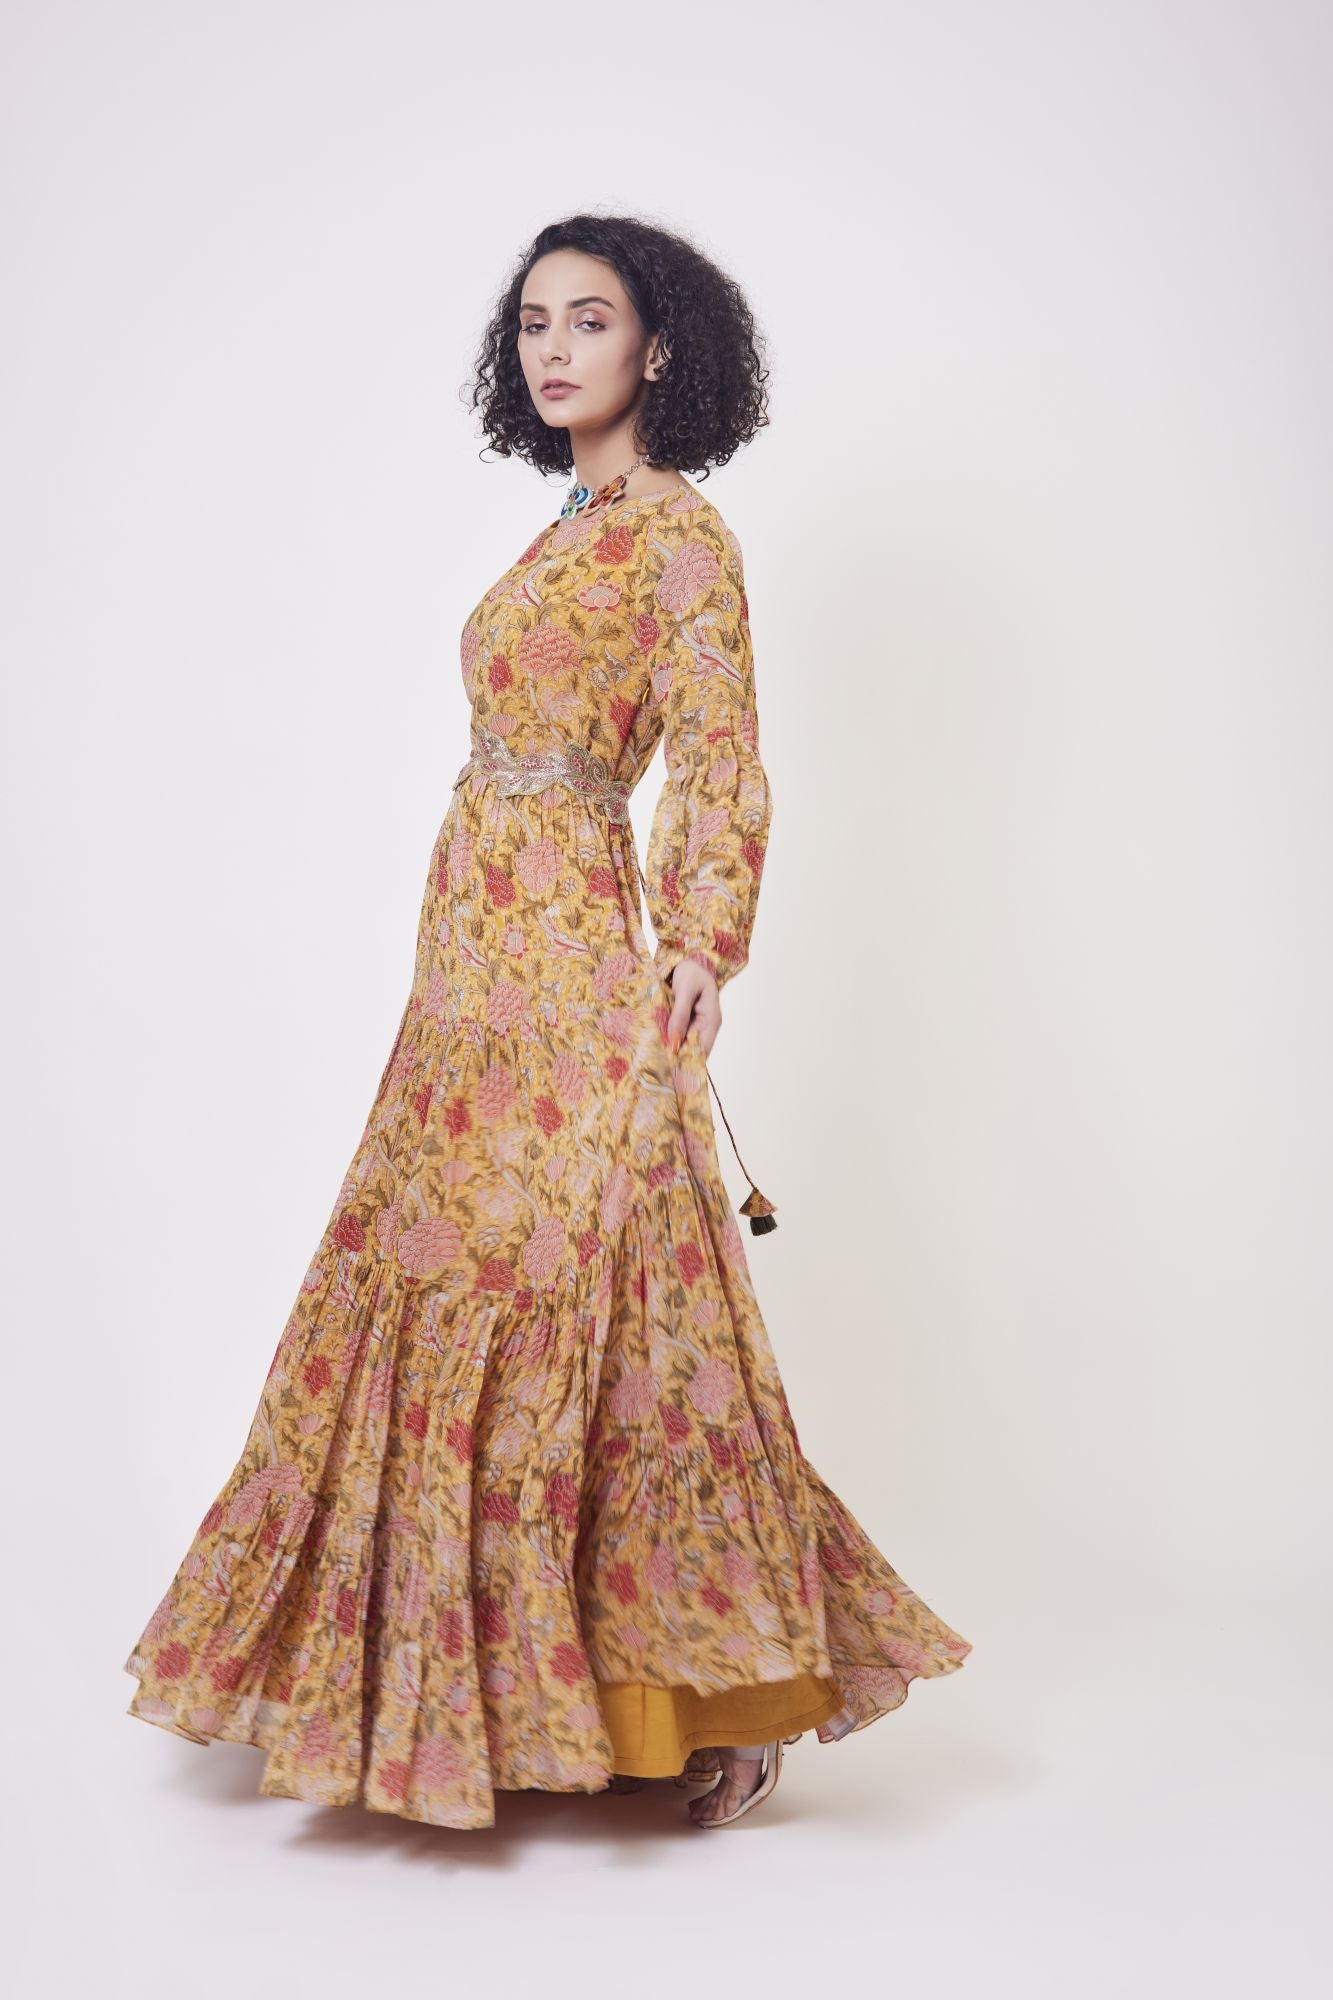 Buy stunning yellow floral print georgette tiered gown in USA. Dazzle on weddings and special occasions with exquisite Indian designer dresses, sharara suits, Anarkali suits, wedding lehengas from Pure Elegance Indian fashion store in USA.-left